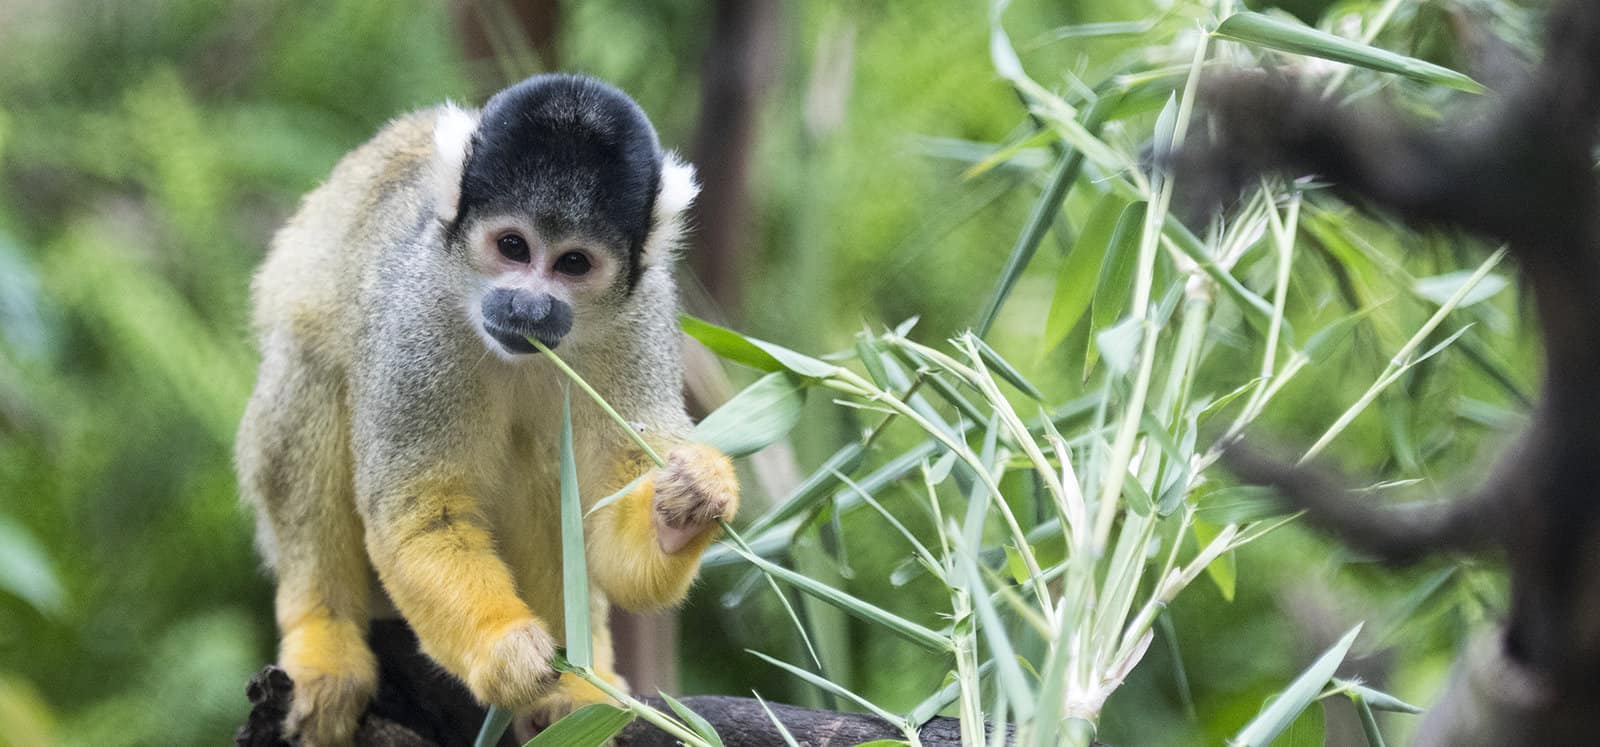 Squirrel Monkey at Adelaide Zoo